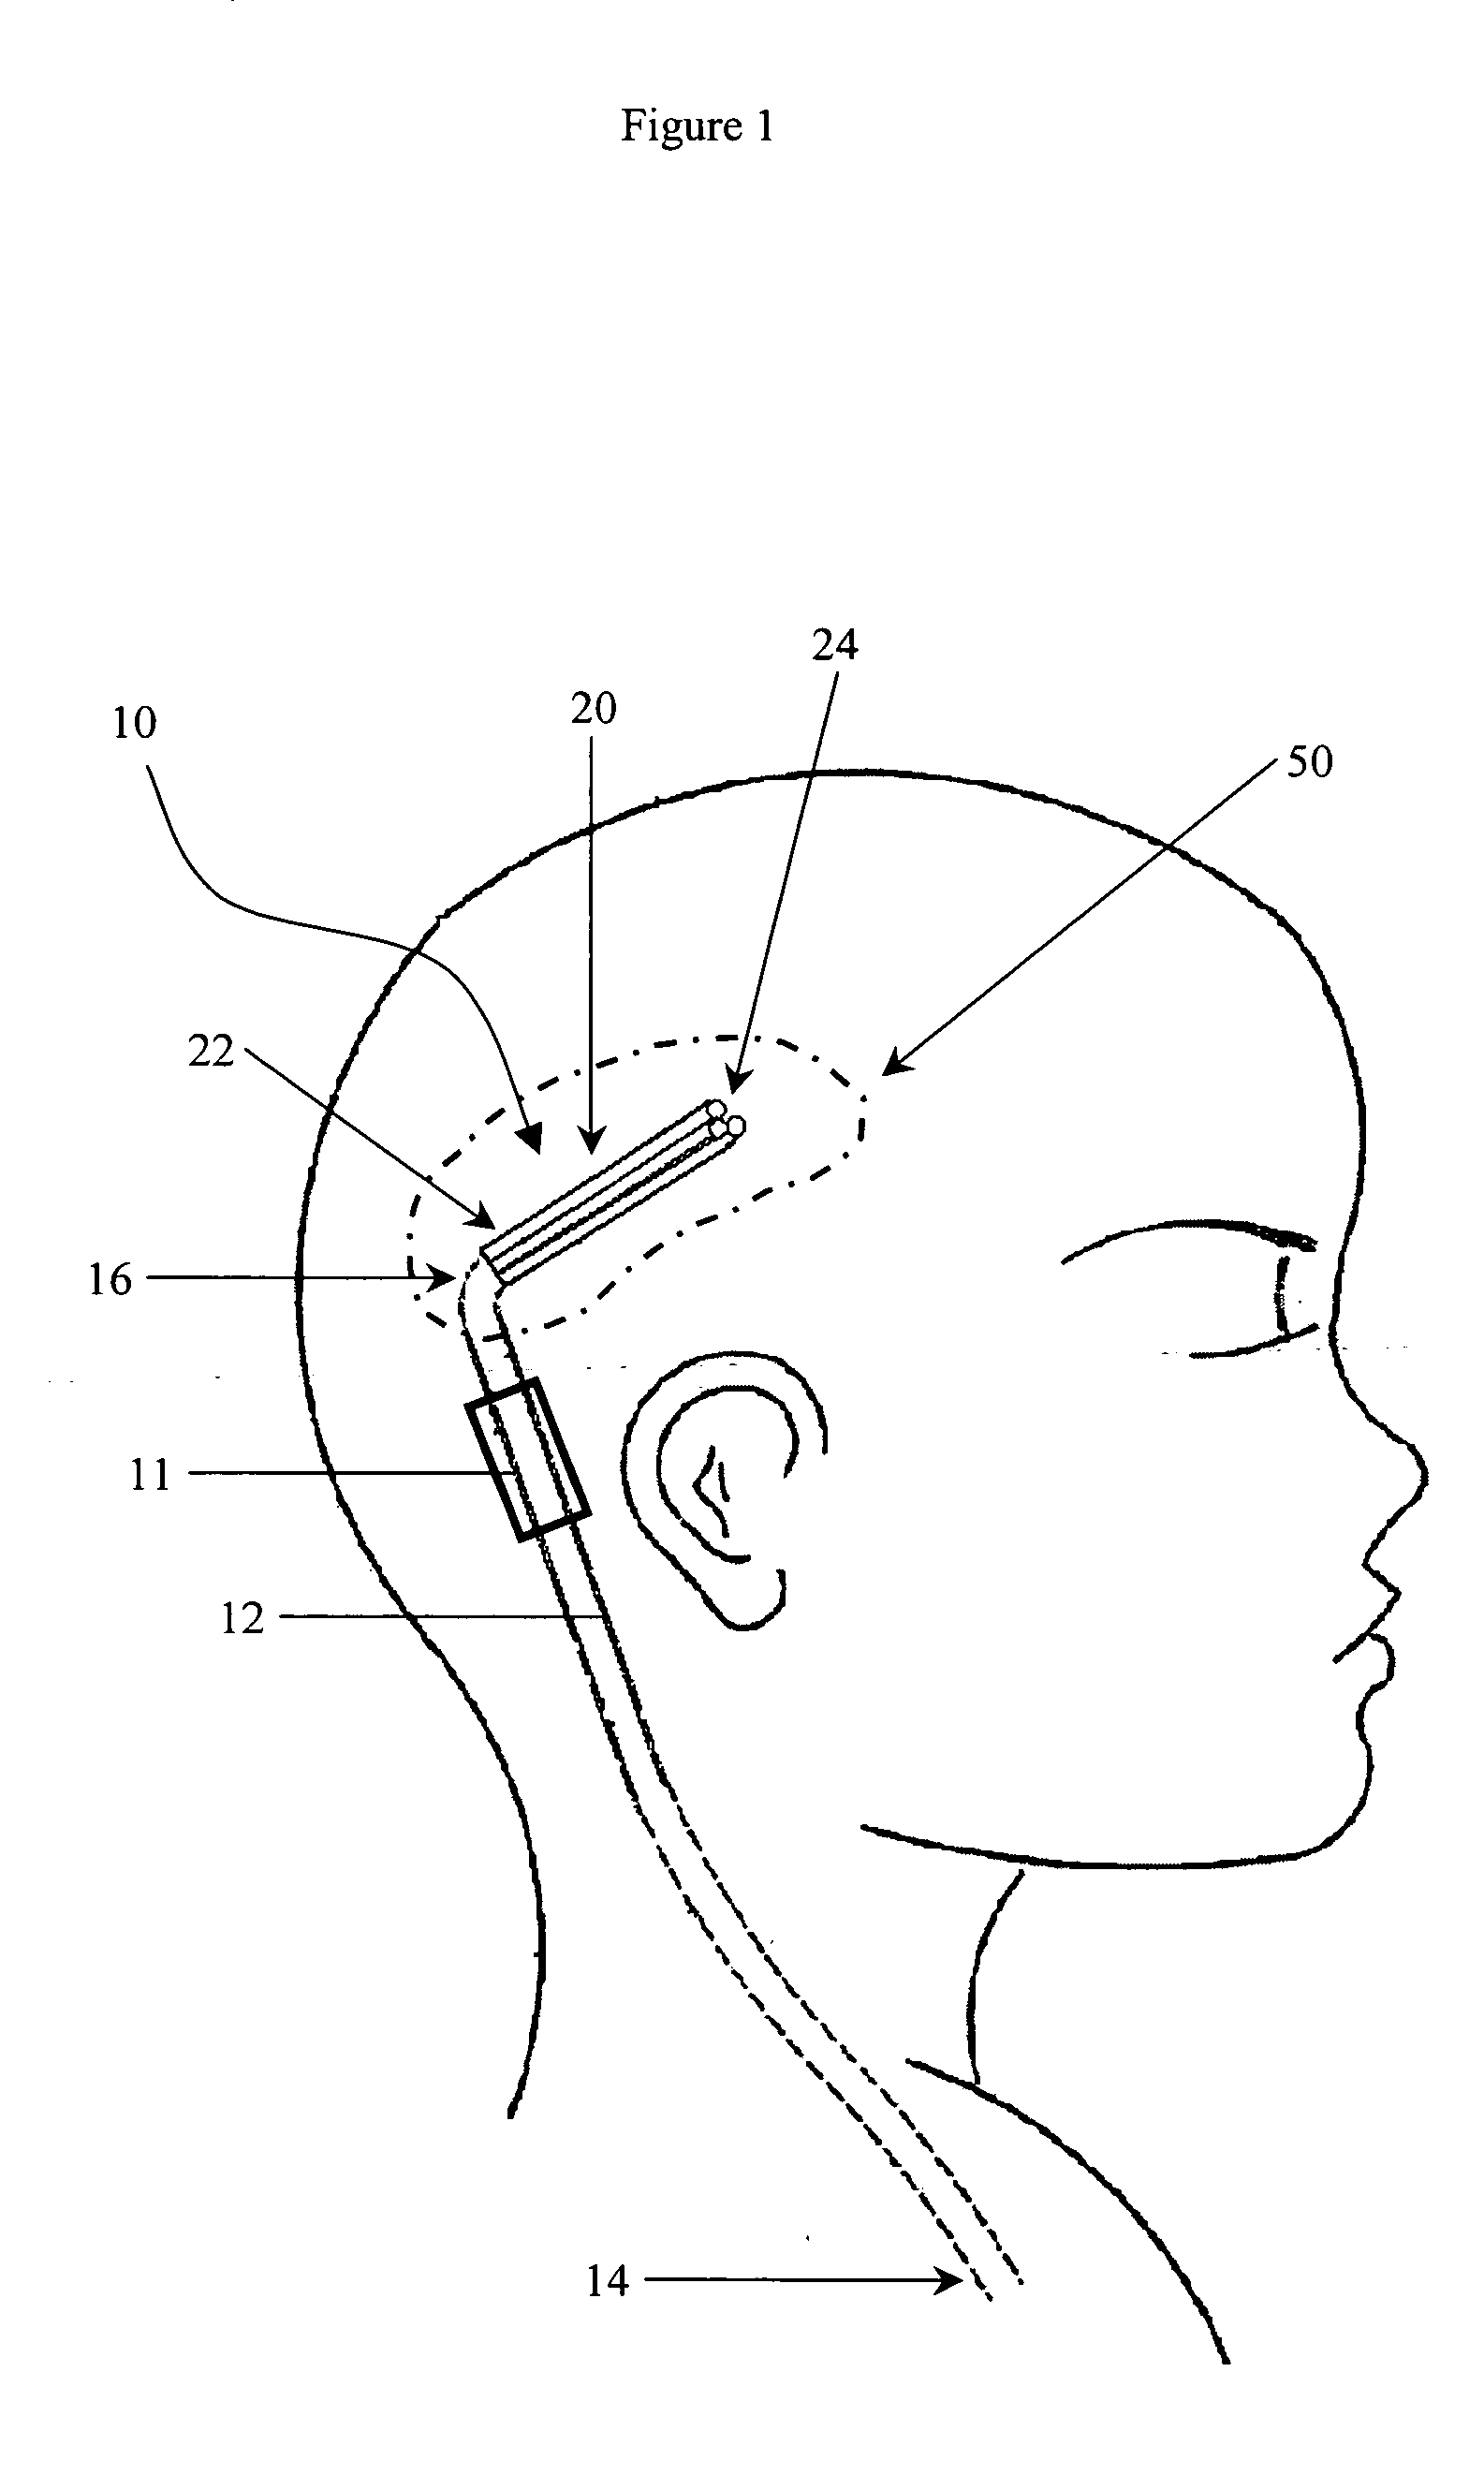 Multi-catheter insertion device and method